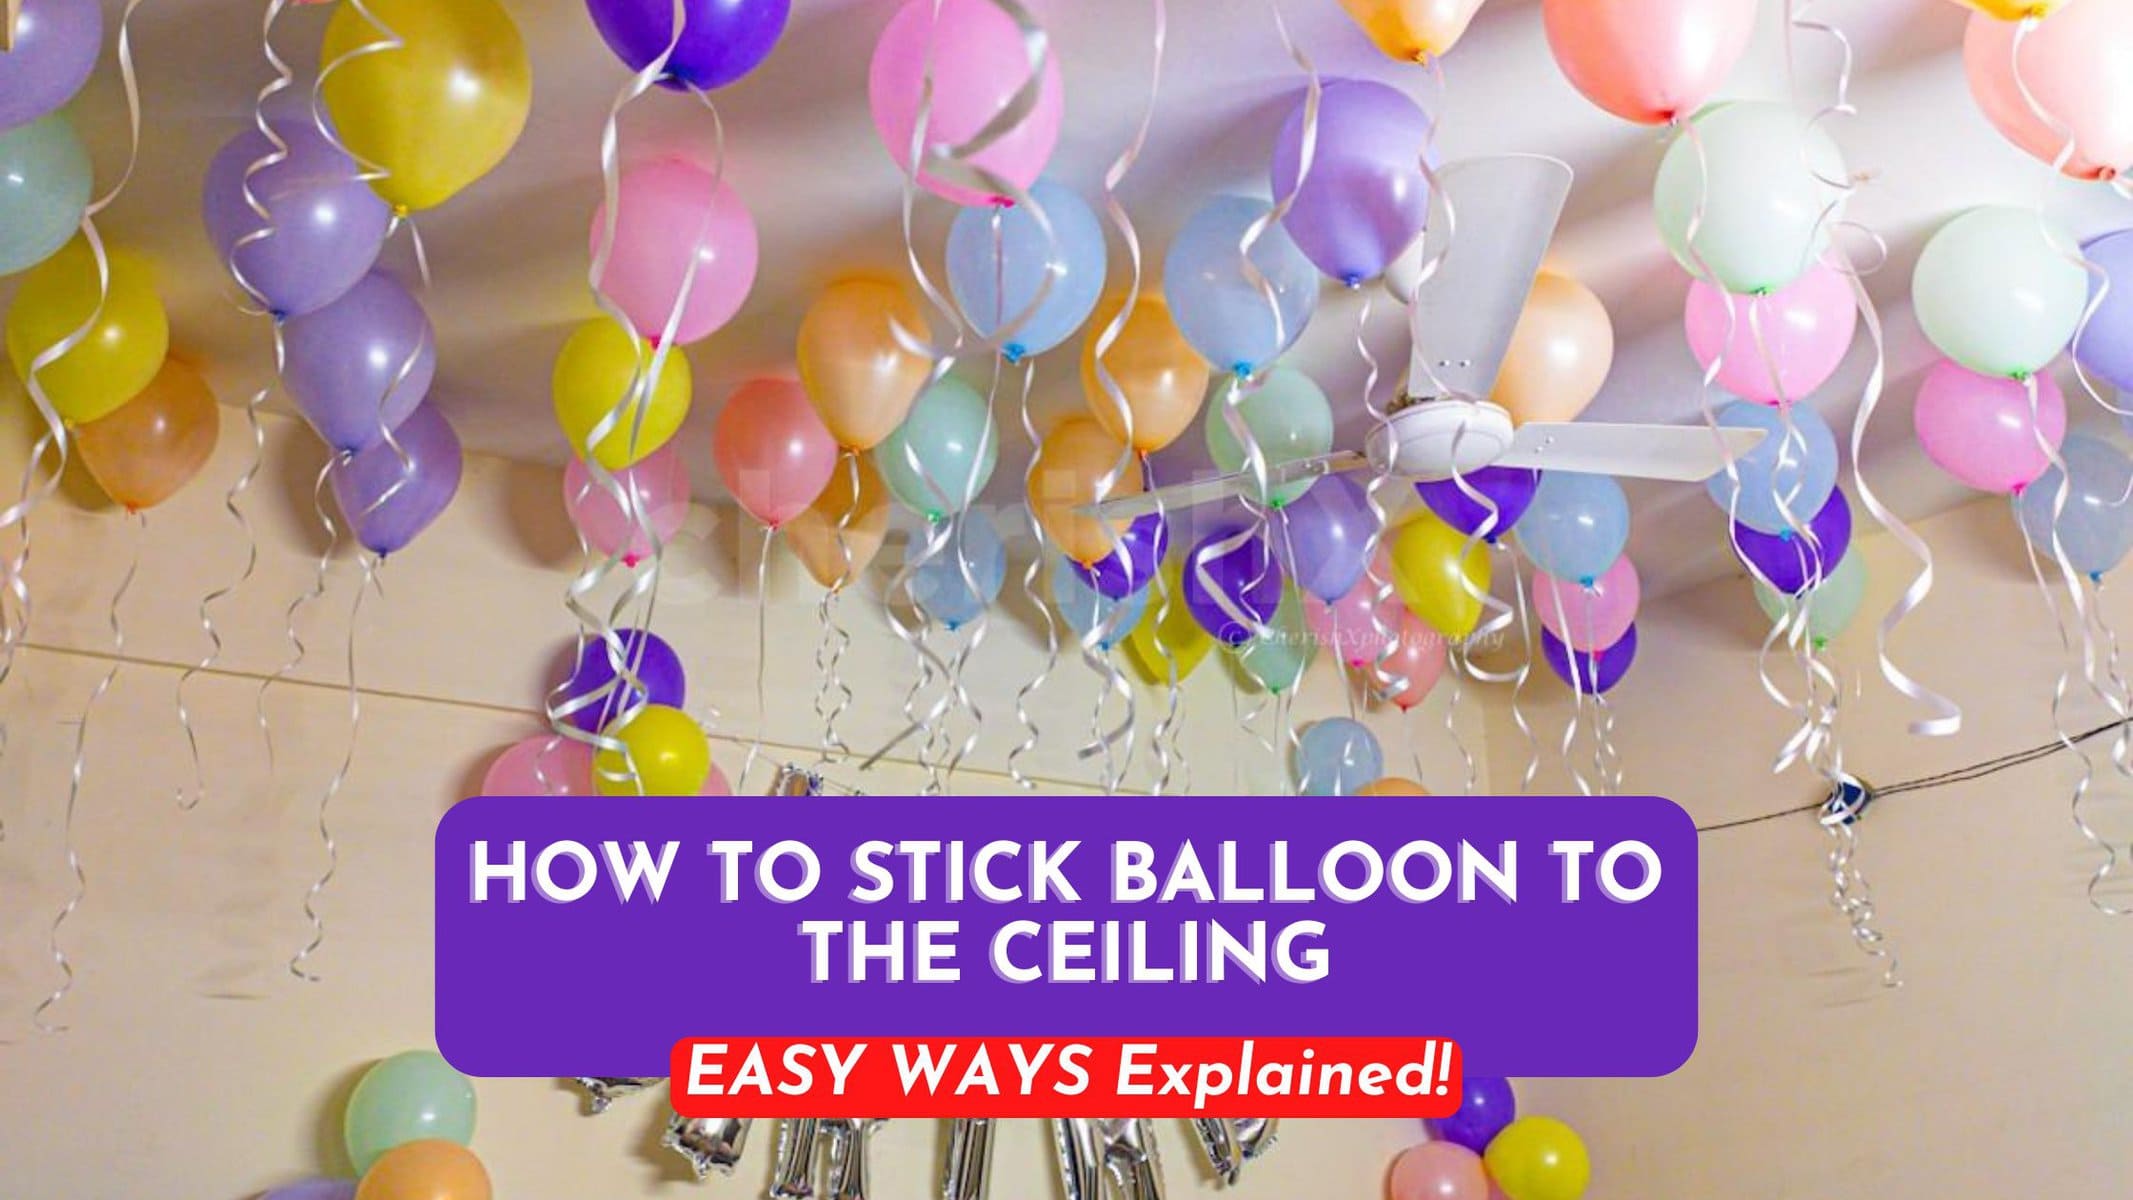 How do you stick balloons to the ceiling?